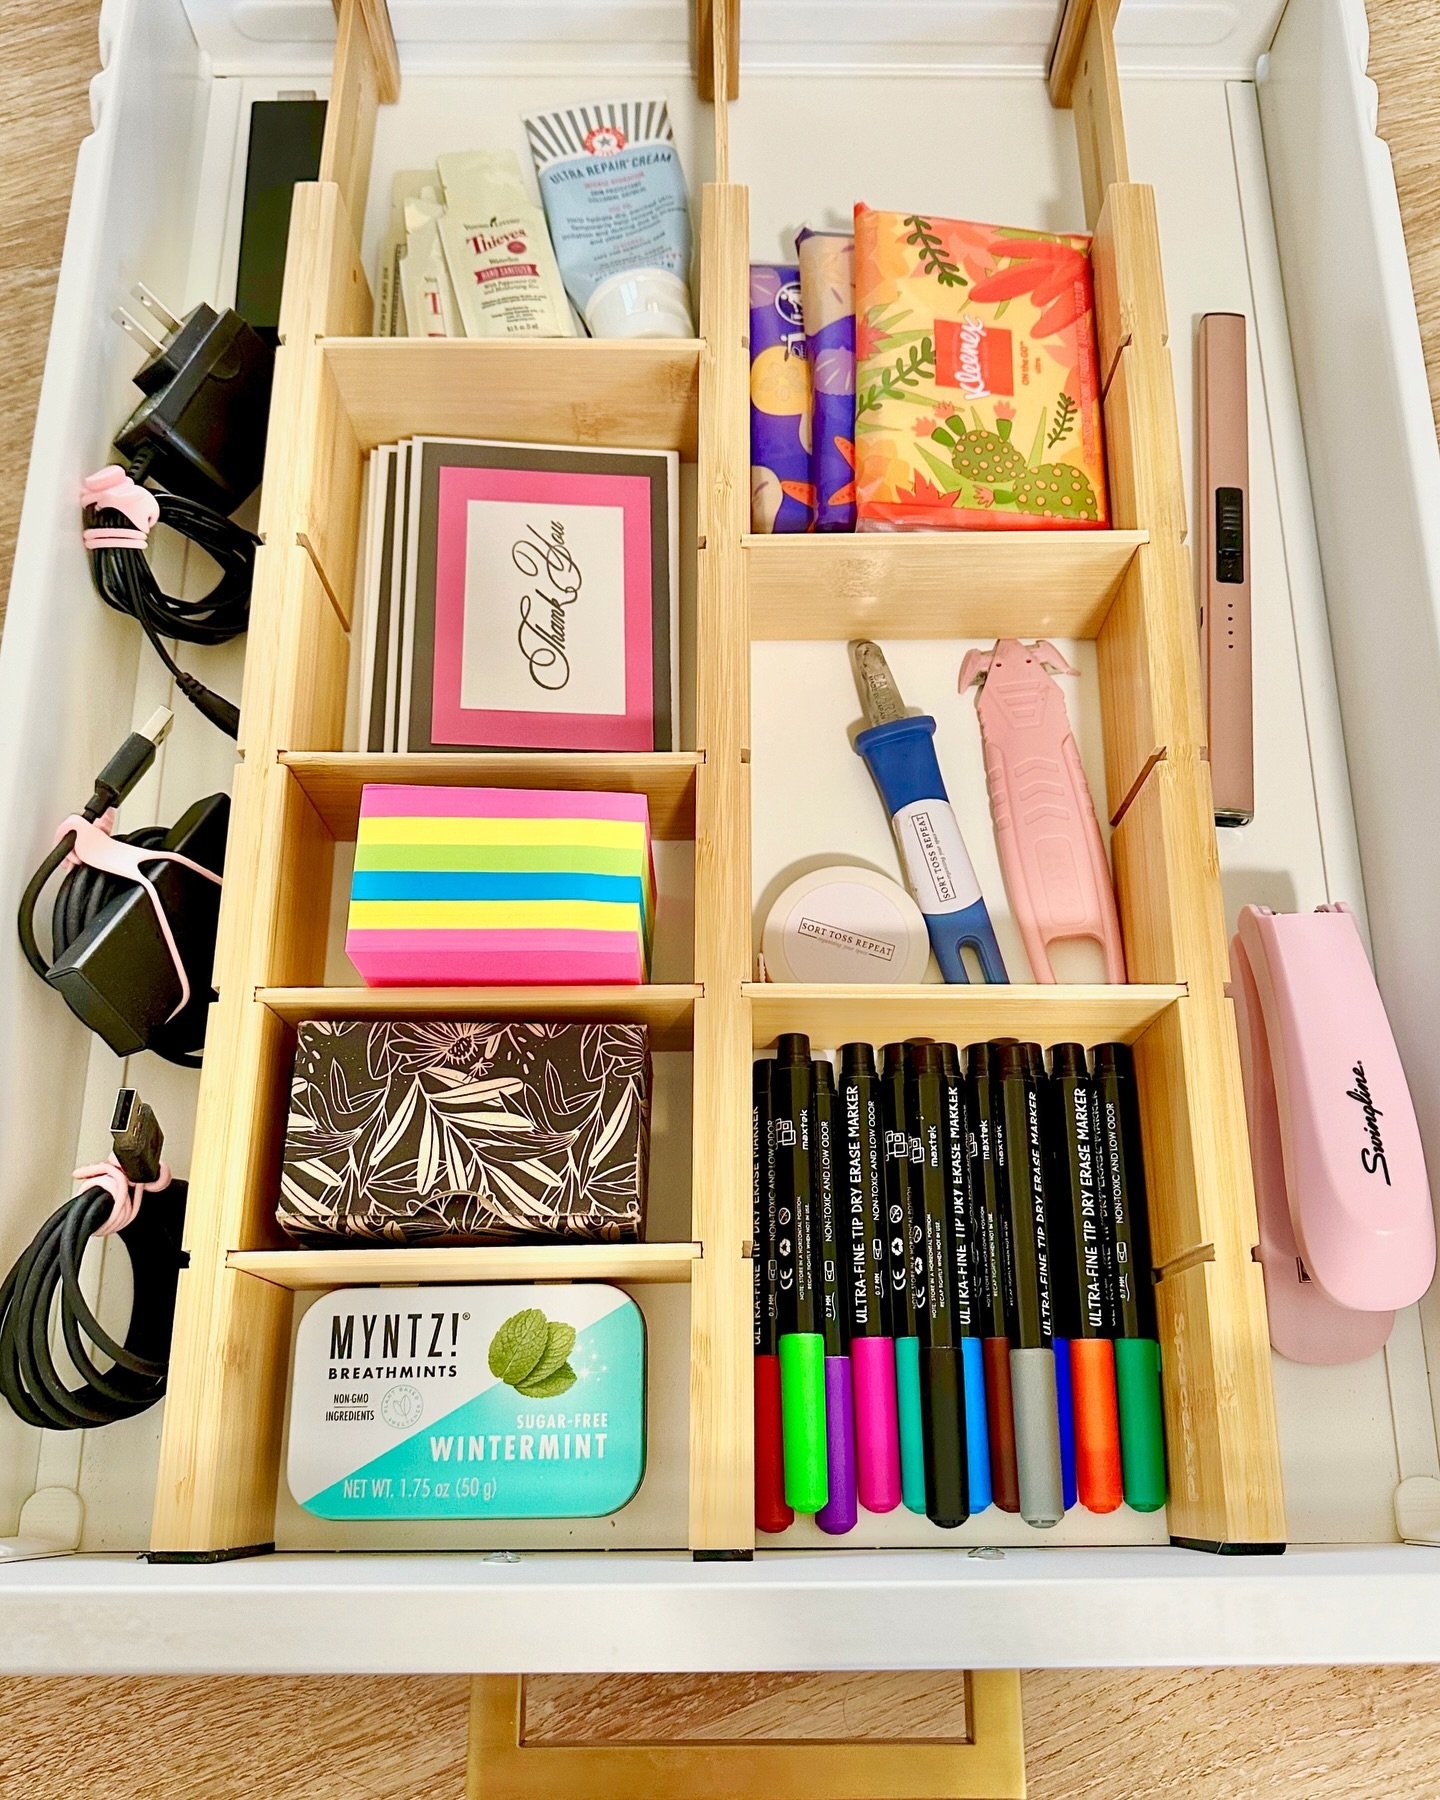 Everyone wants to know what&rsquo;s the best place to start organizing. &thinsp;
&thinsp;
I recommend starting with the &ldquo;junk drawer&rdquo; you will be amazed how decluttering and organizing a space like a junk drawer can bring so much satisfac